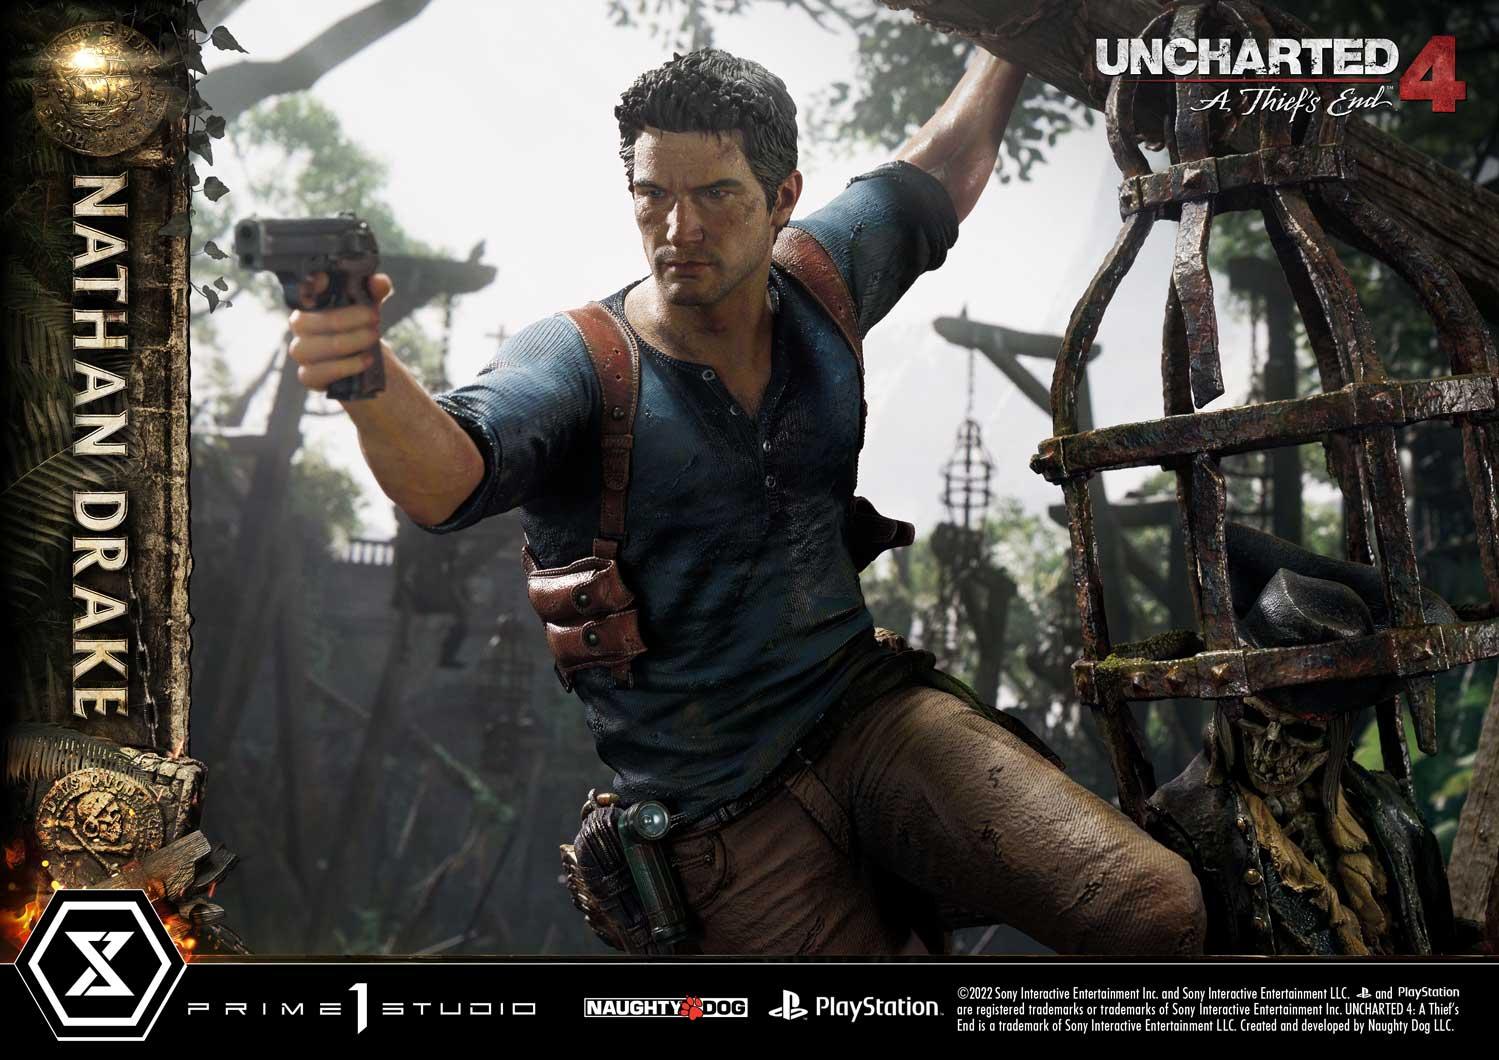 1/4 Quarter Scale Statue: Nathan Drake Uncharted 4 A Thief's End Ultimate  Premium Masterline 1/4 Statue by Prime 1 Studio